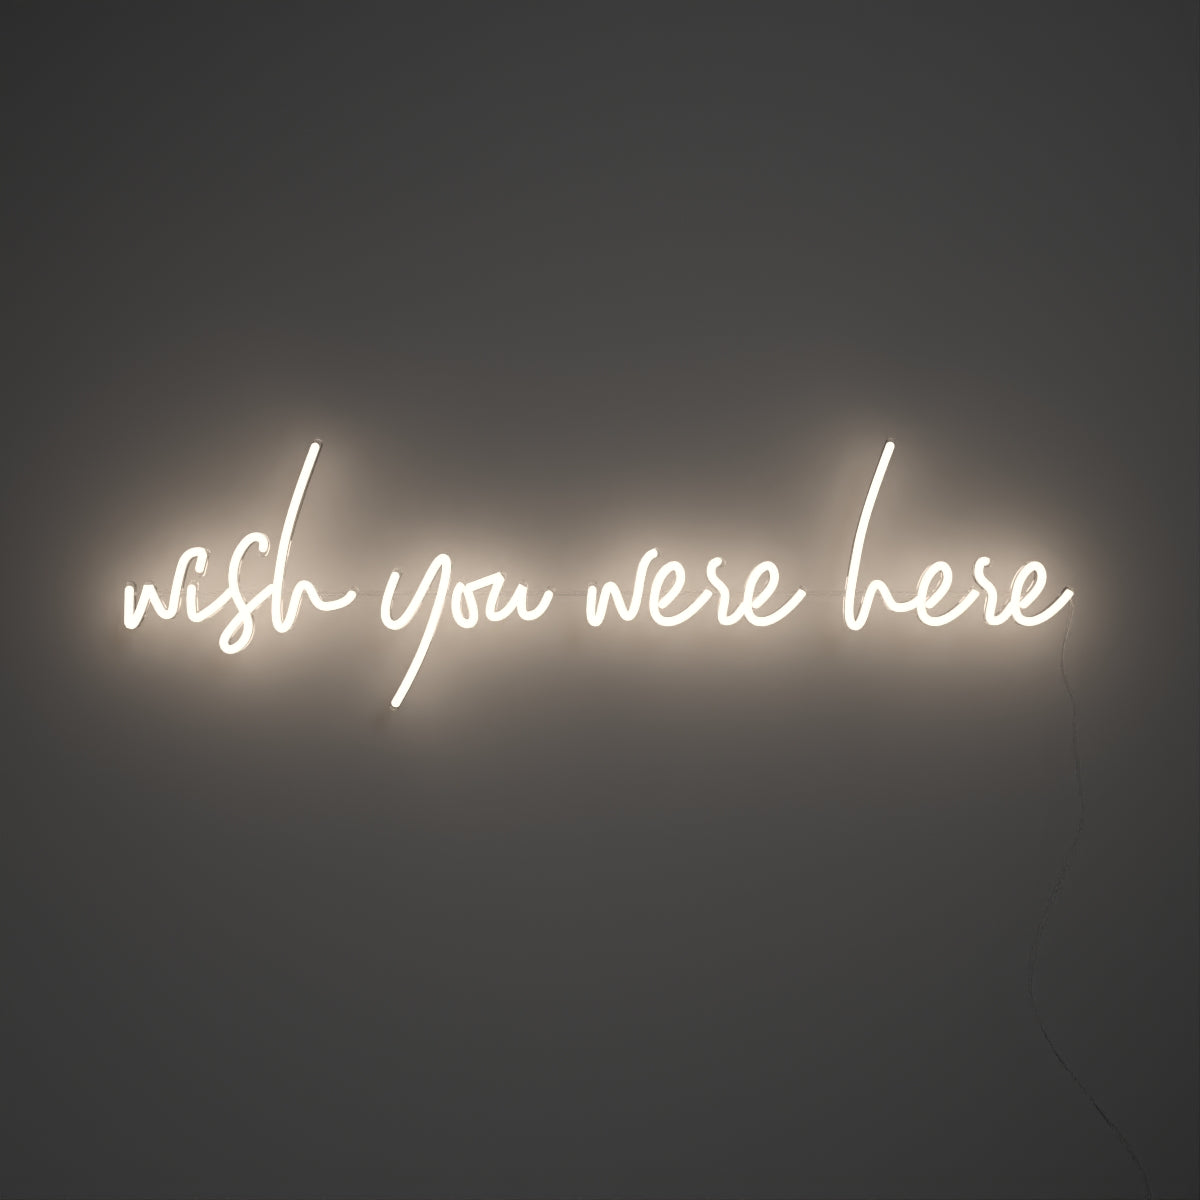 Image of Wish you were here